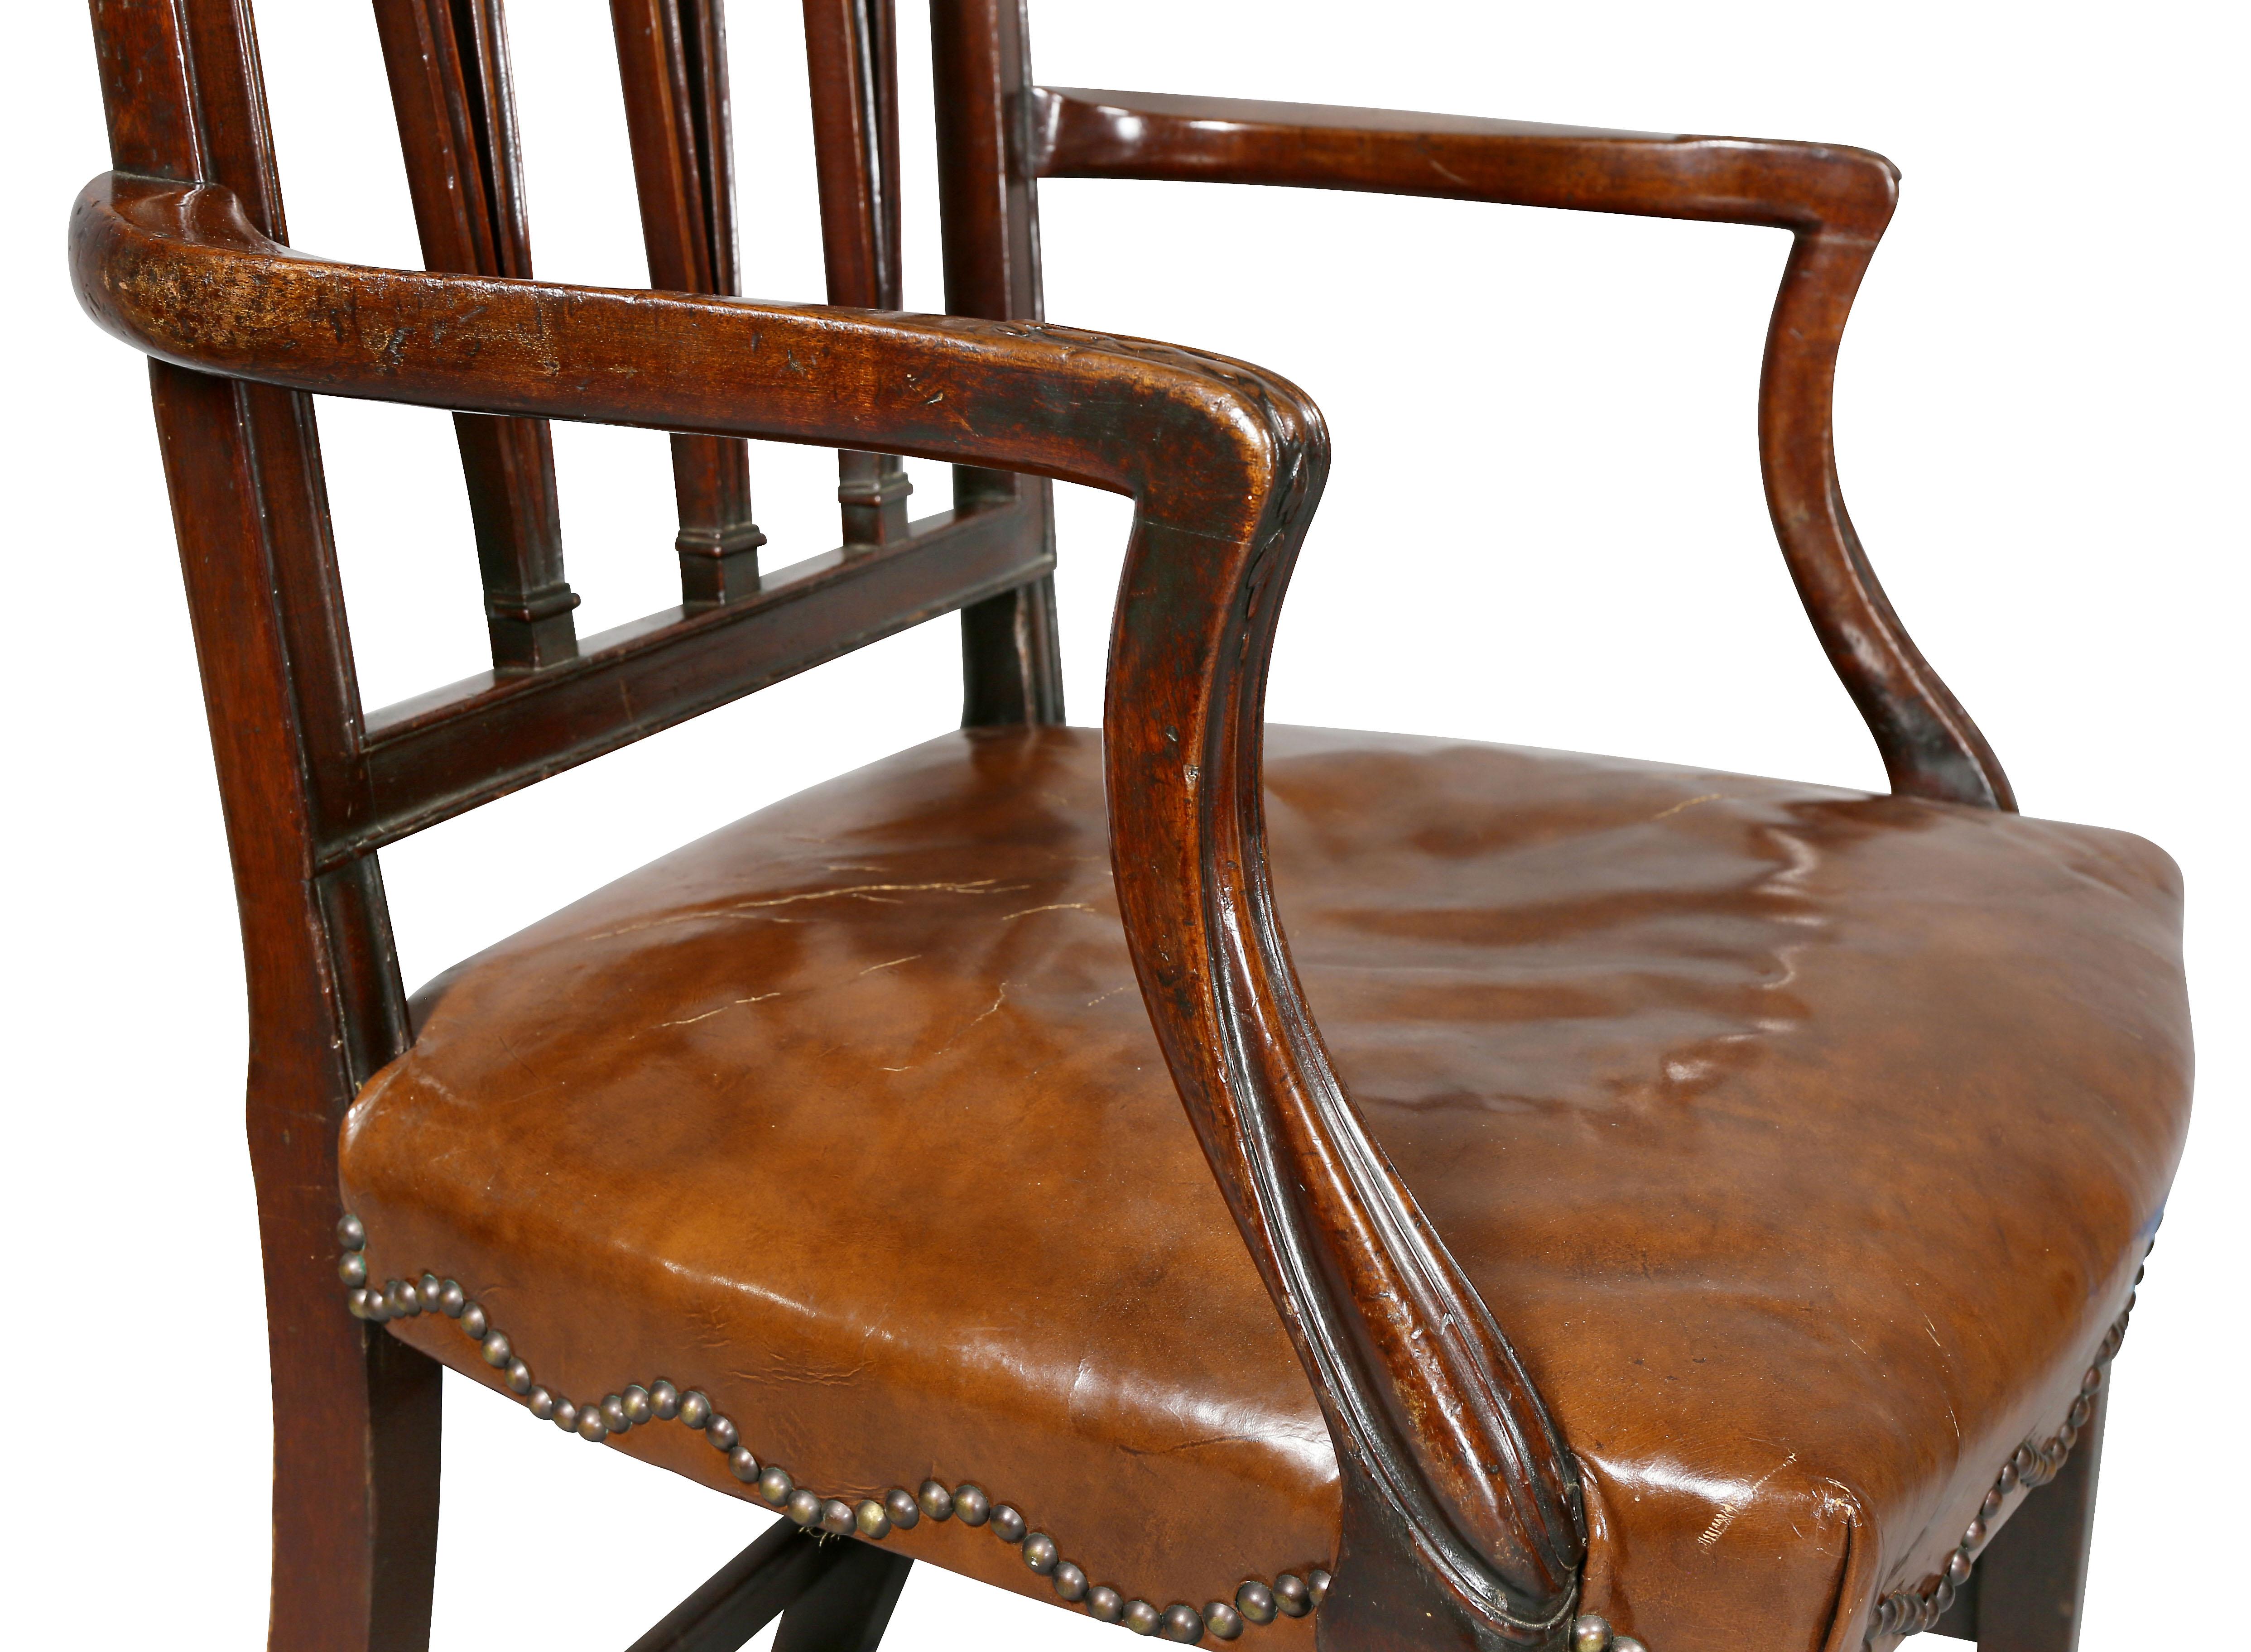 Sheraton form of large scale with carved arched back with three pierced splats, arms joining a brown leather seat, square tapered legs, stretchers.